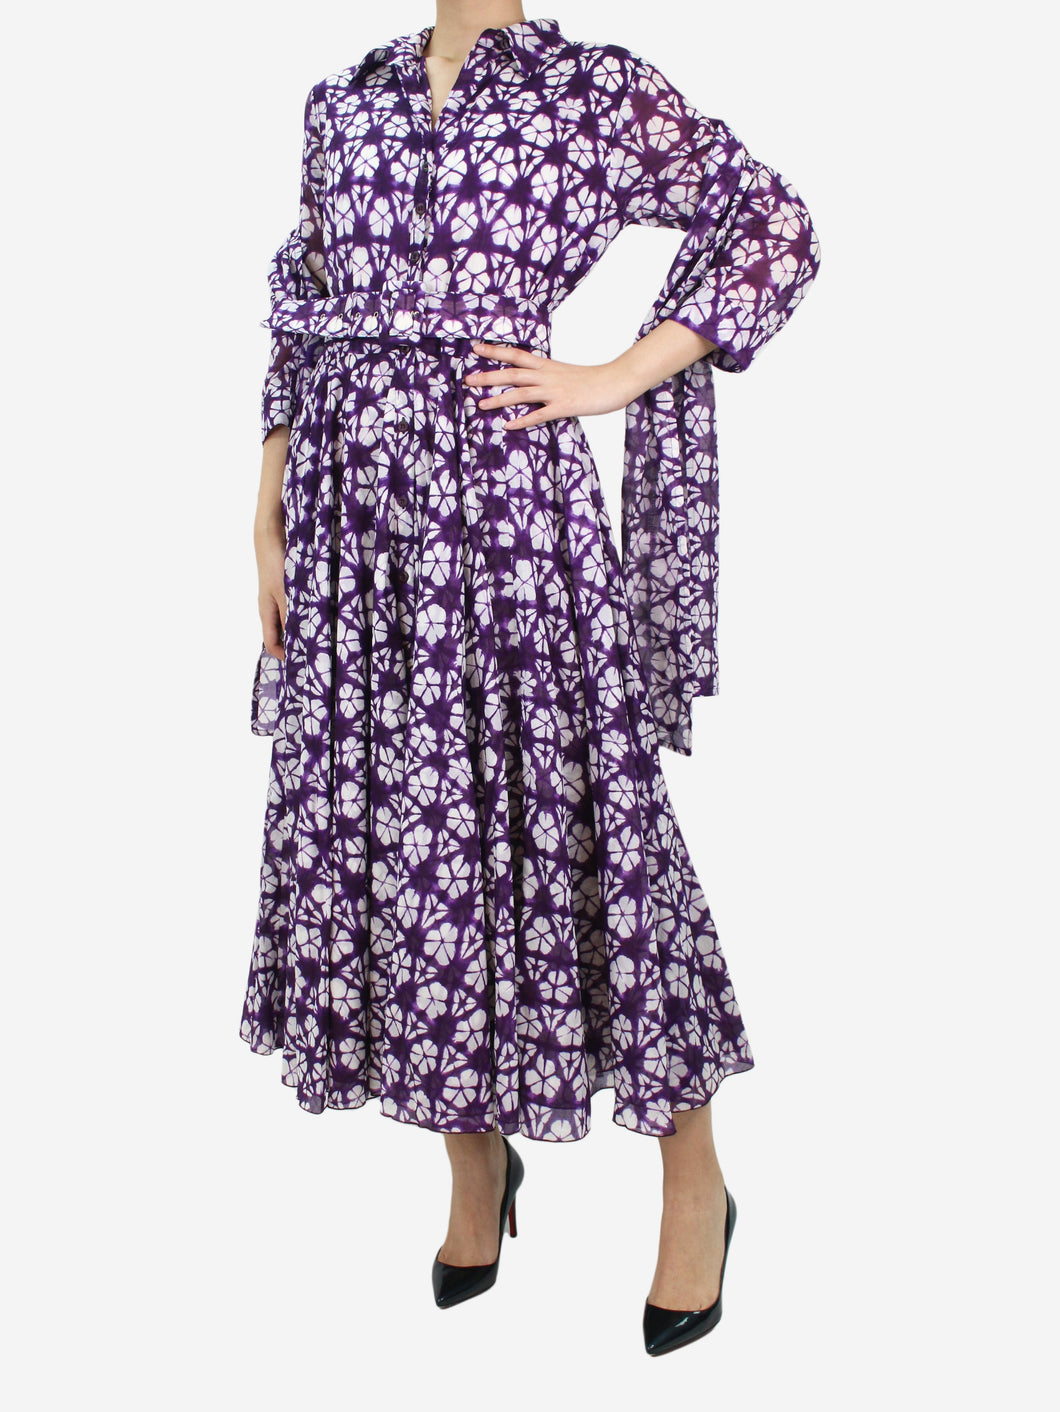 Purple floral printed shirt dress with belt and scarf - size US 10 Sets Samantha Sung 